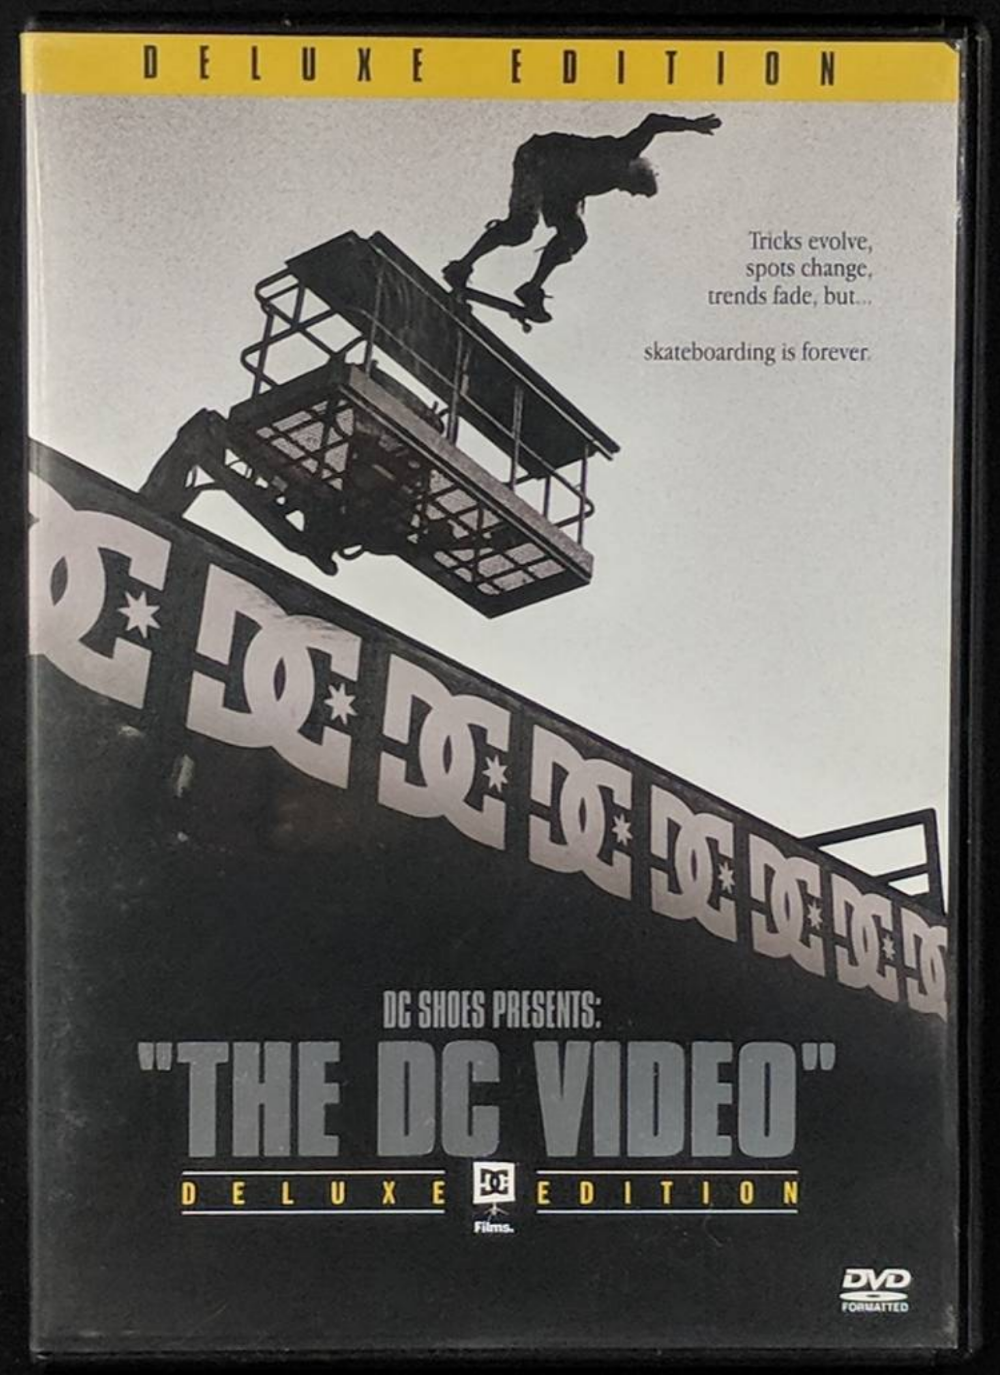 DC - The DC Video (Deluxe Edition) cover art